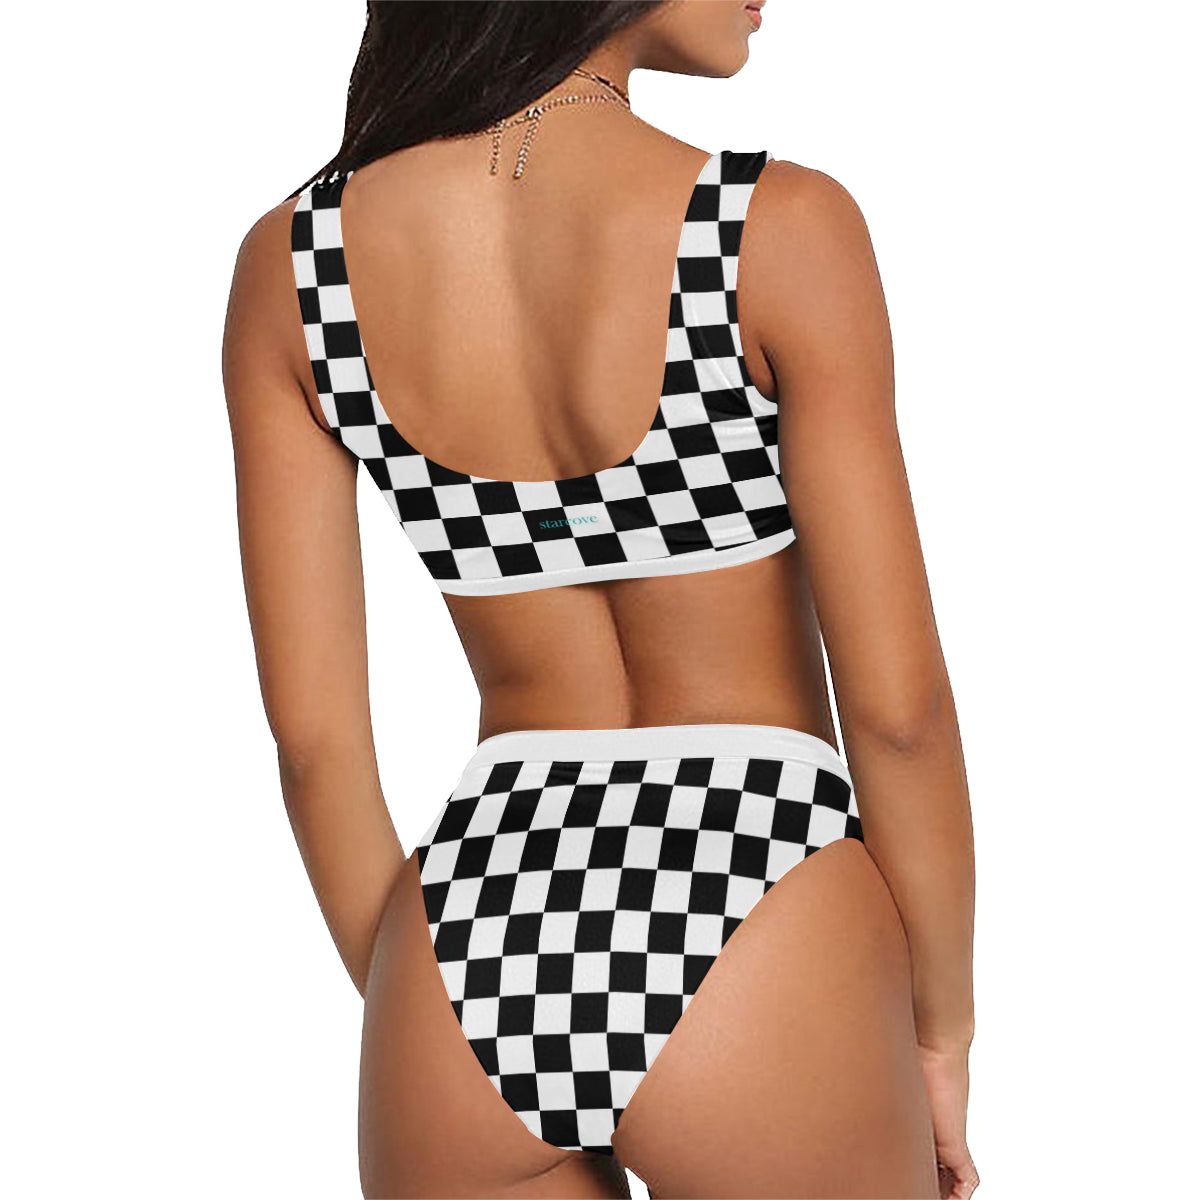 Checkered Bikini Set, High Waisted Black White Checkerboard 80s 90s Top Check Cheeky Rave Swimsuit Swimwear Bathing Suit Plus Size Two Piece Starcove Fashion